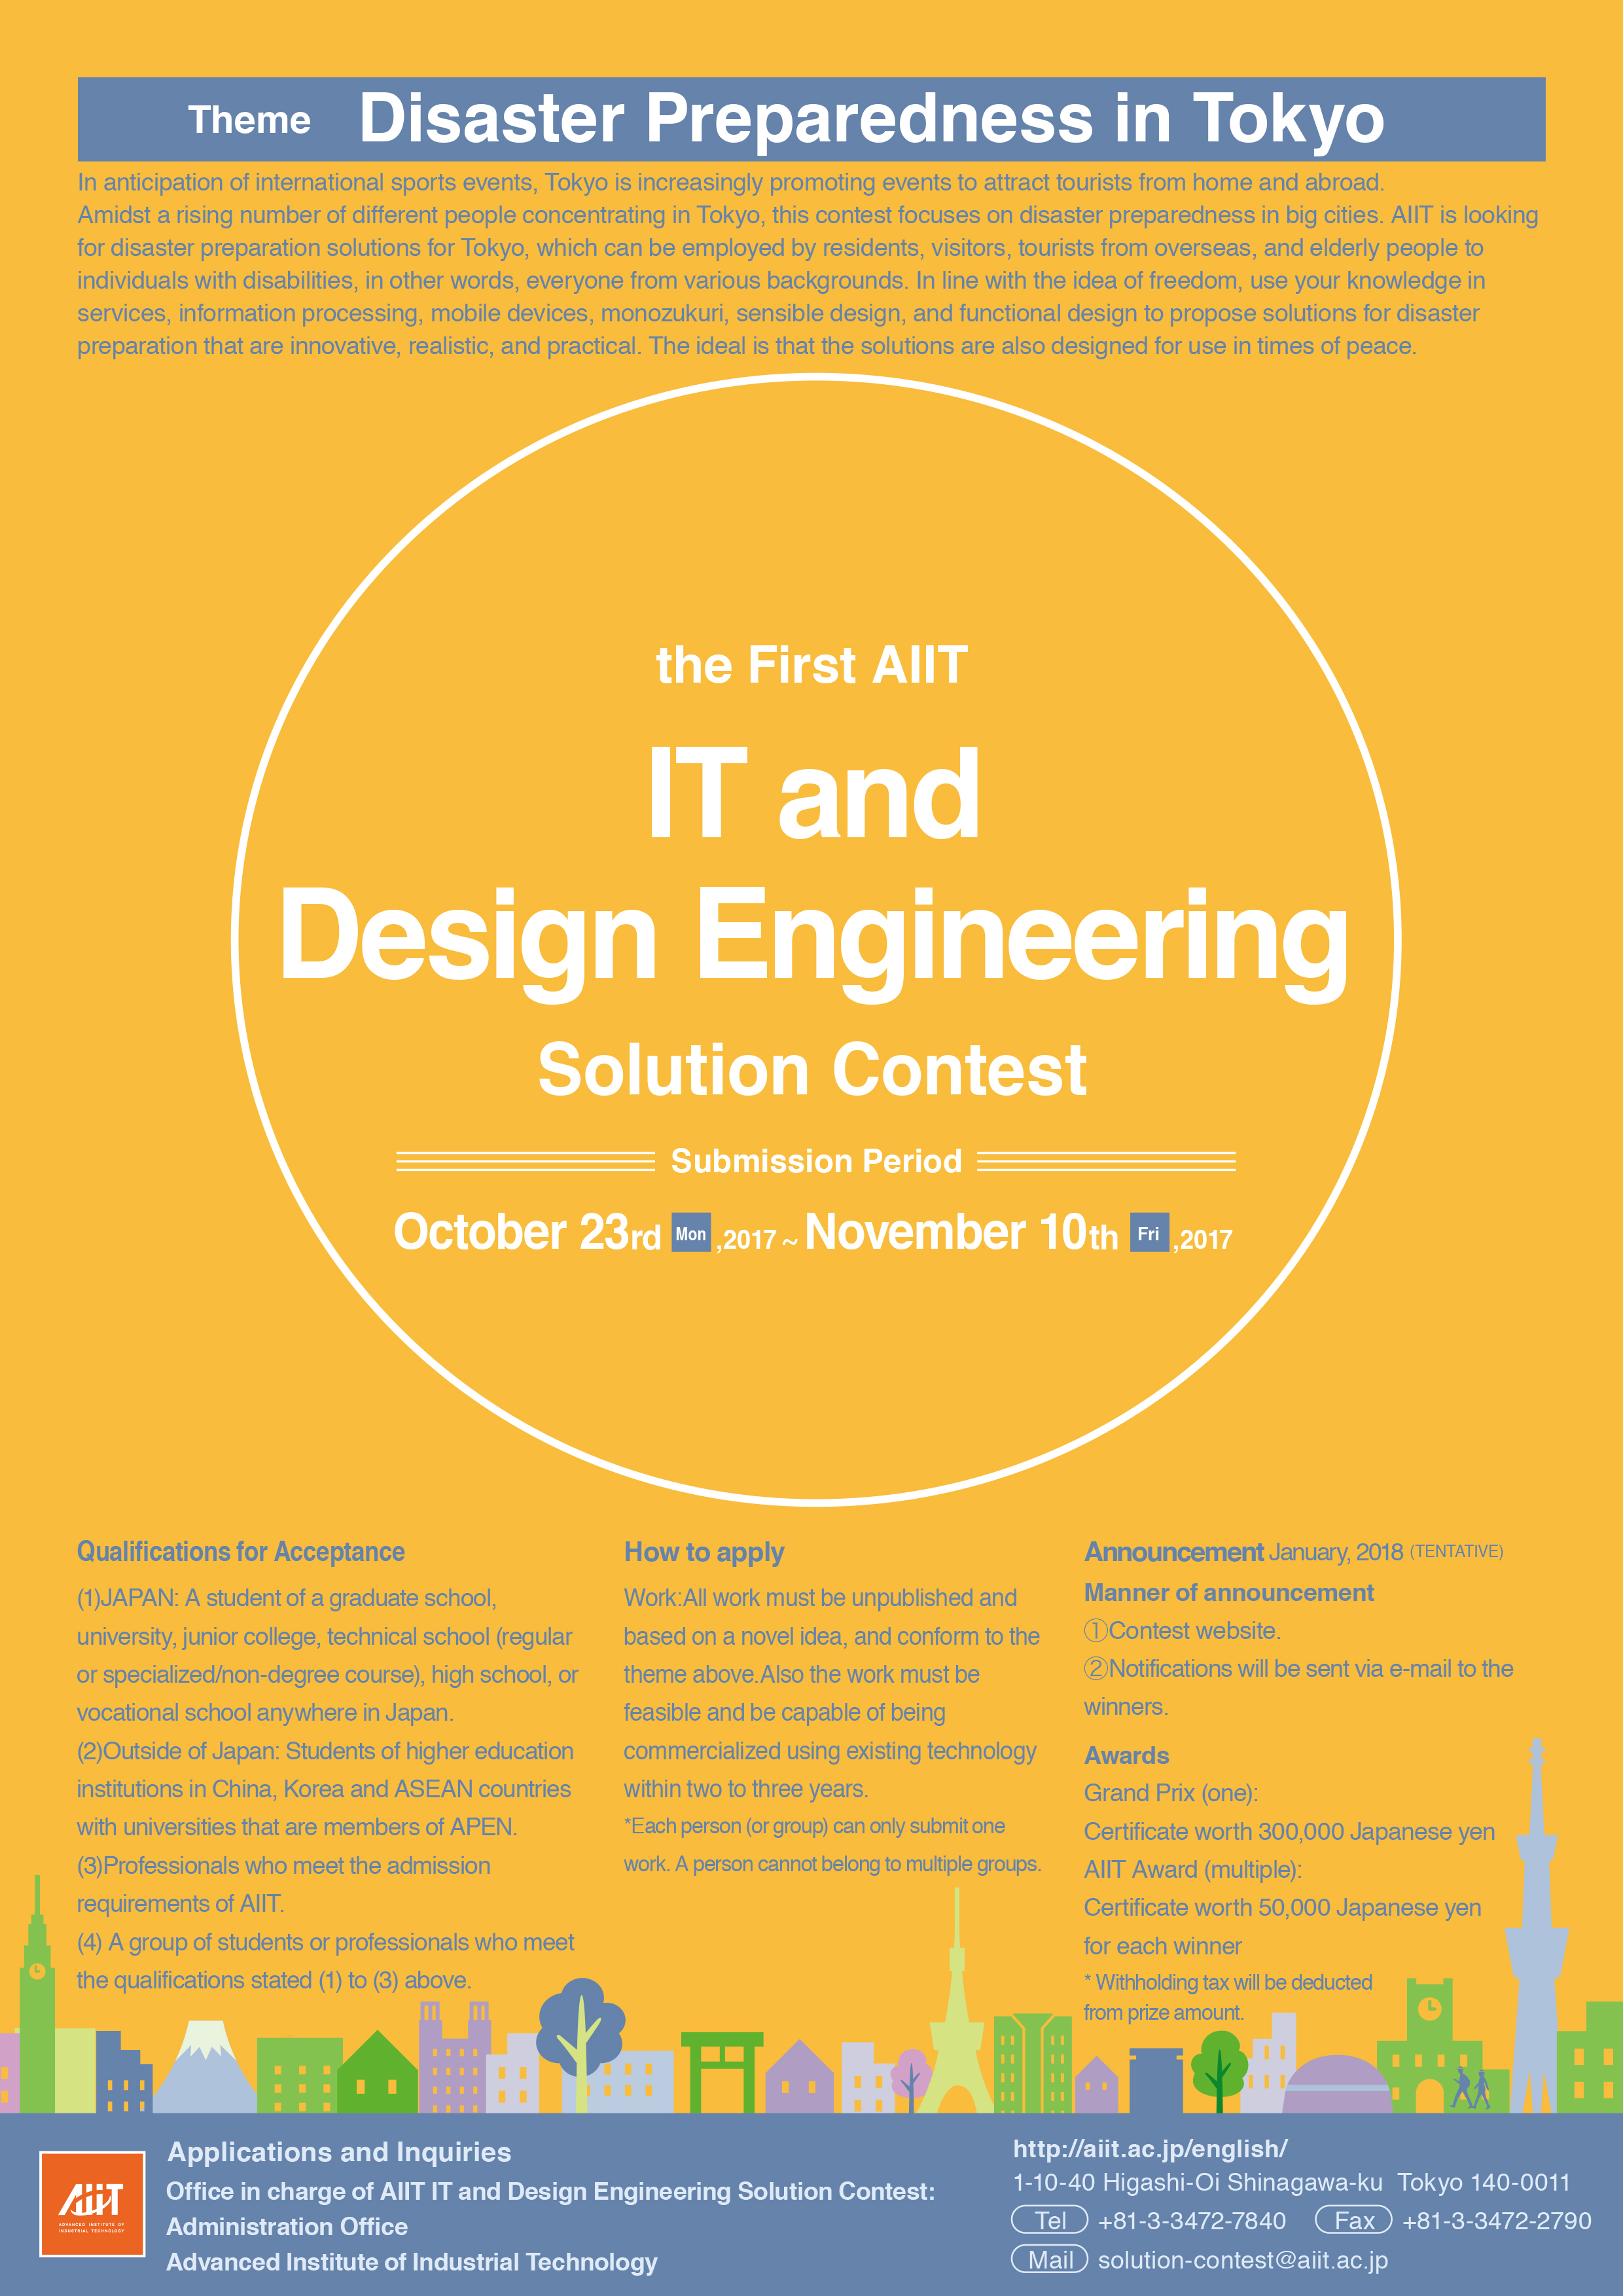 The First AIIT IT and Design Engineering Solution Contest (images)